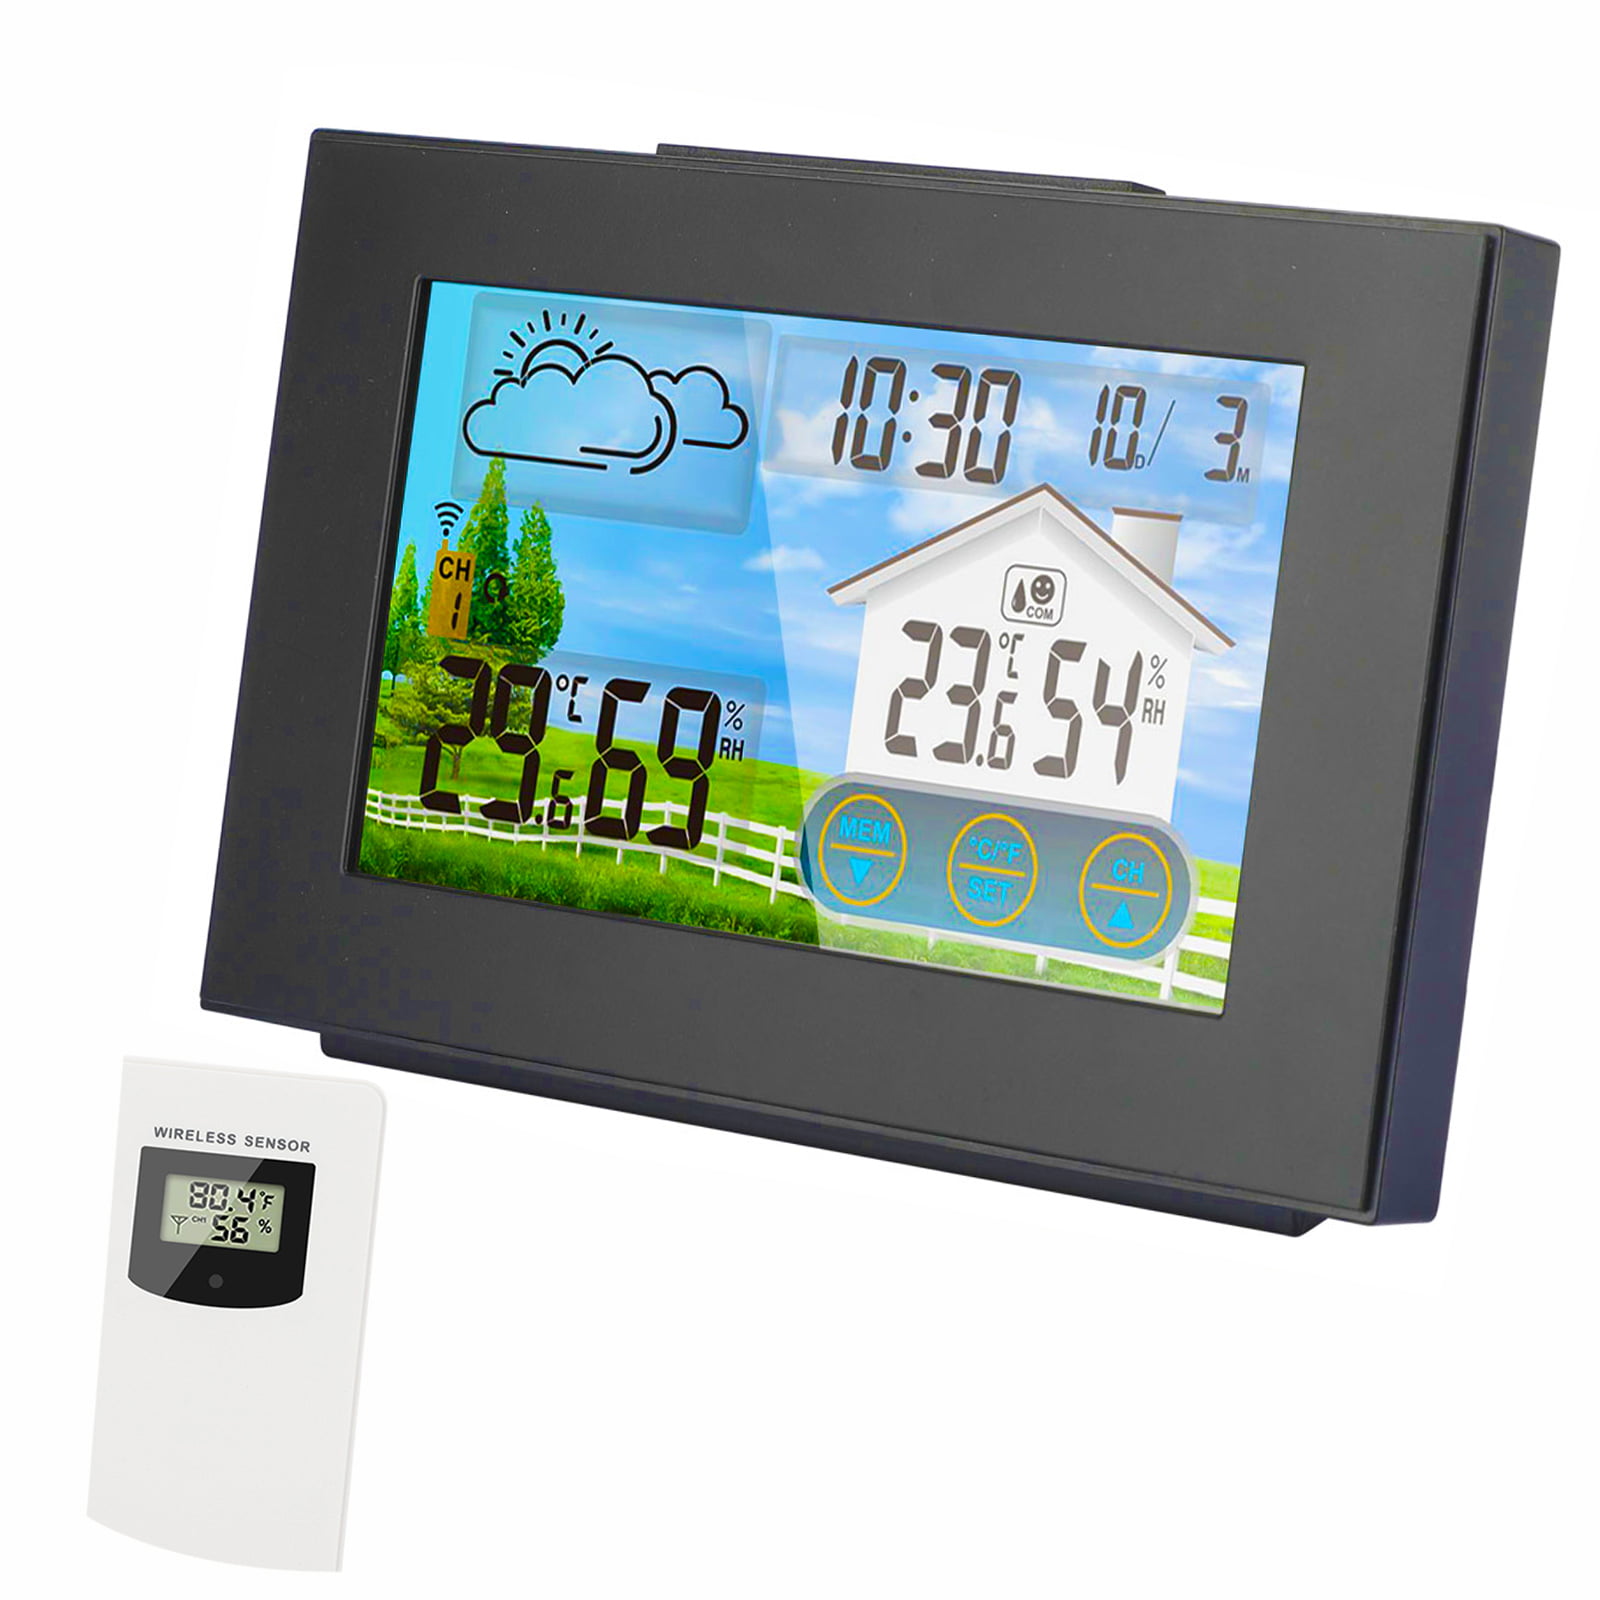 Digital Weather Station Wireless Indoor Outdoor Thermometer Forecast Humidity UK